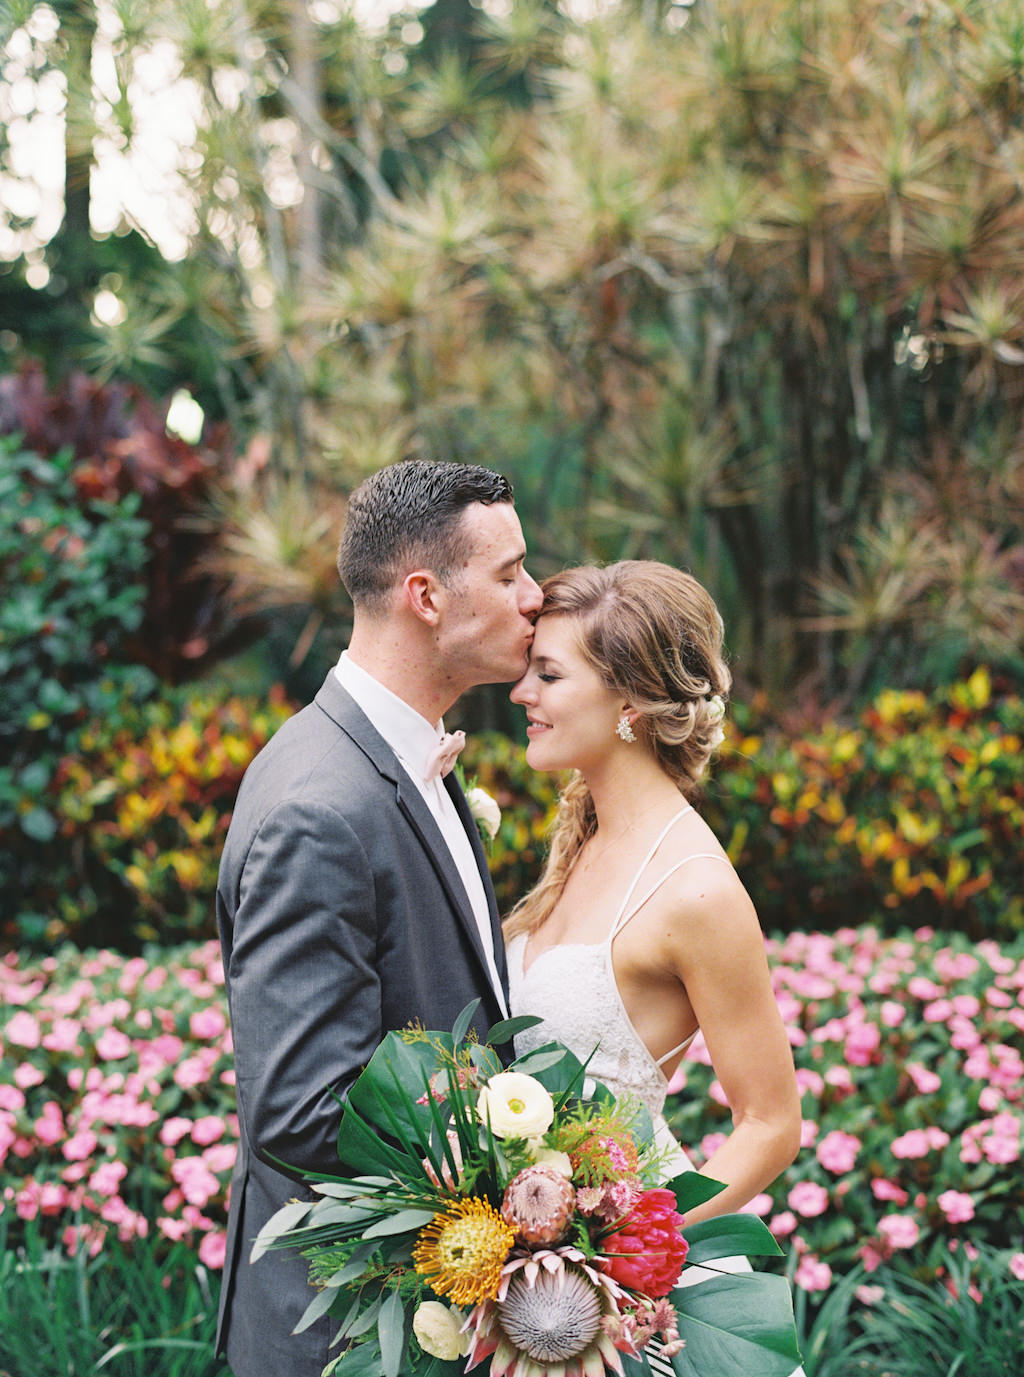 Outdoor Bride and Groom Portrait A-Line Strappy Lace Wedding Dress, Braided Hair with White Flowers and Greenery, White, Pink King Protea and Yellow Tropical Inspired Floral Bouquet, Groom in Grey Suit | Outdoor St. Petersburg Wedding Venue Sunken Gardens | Planner Southern Glam Events and Weddings